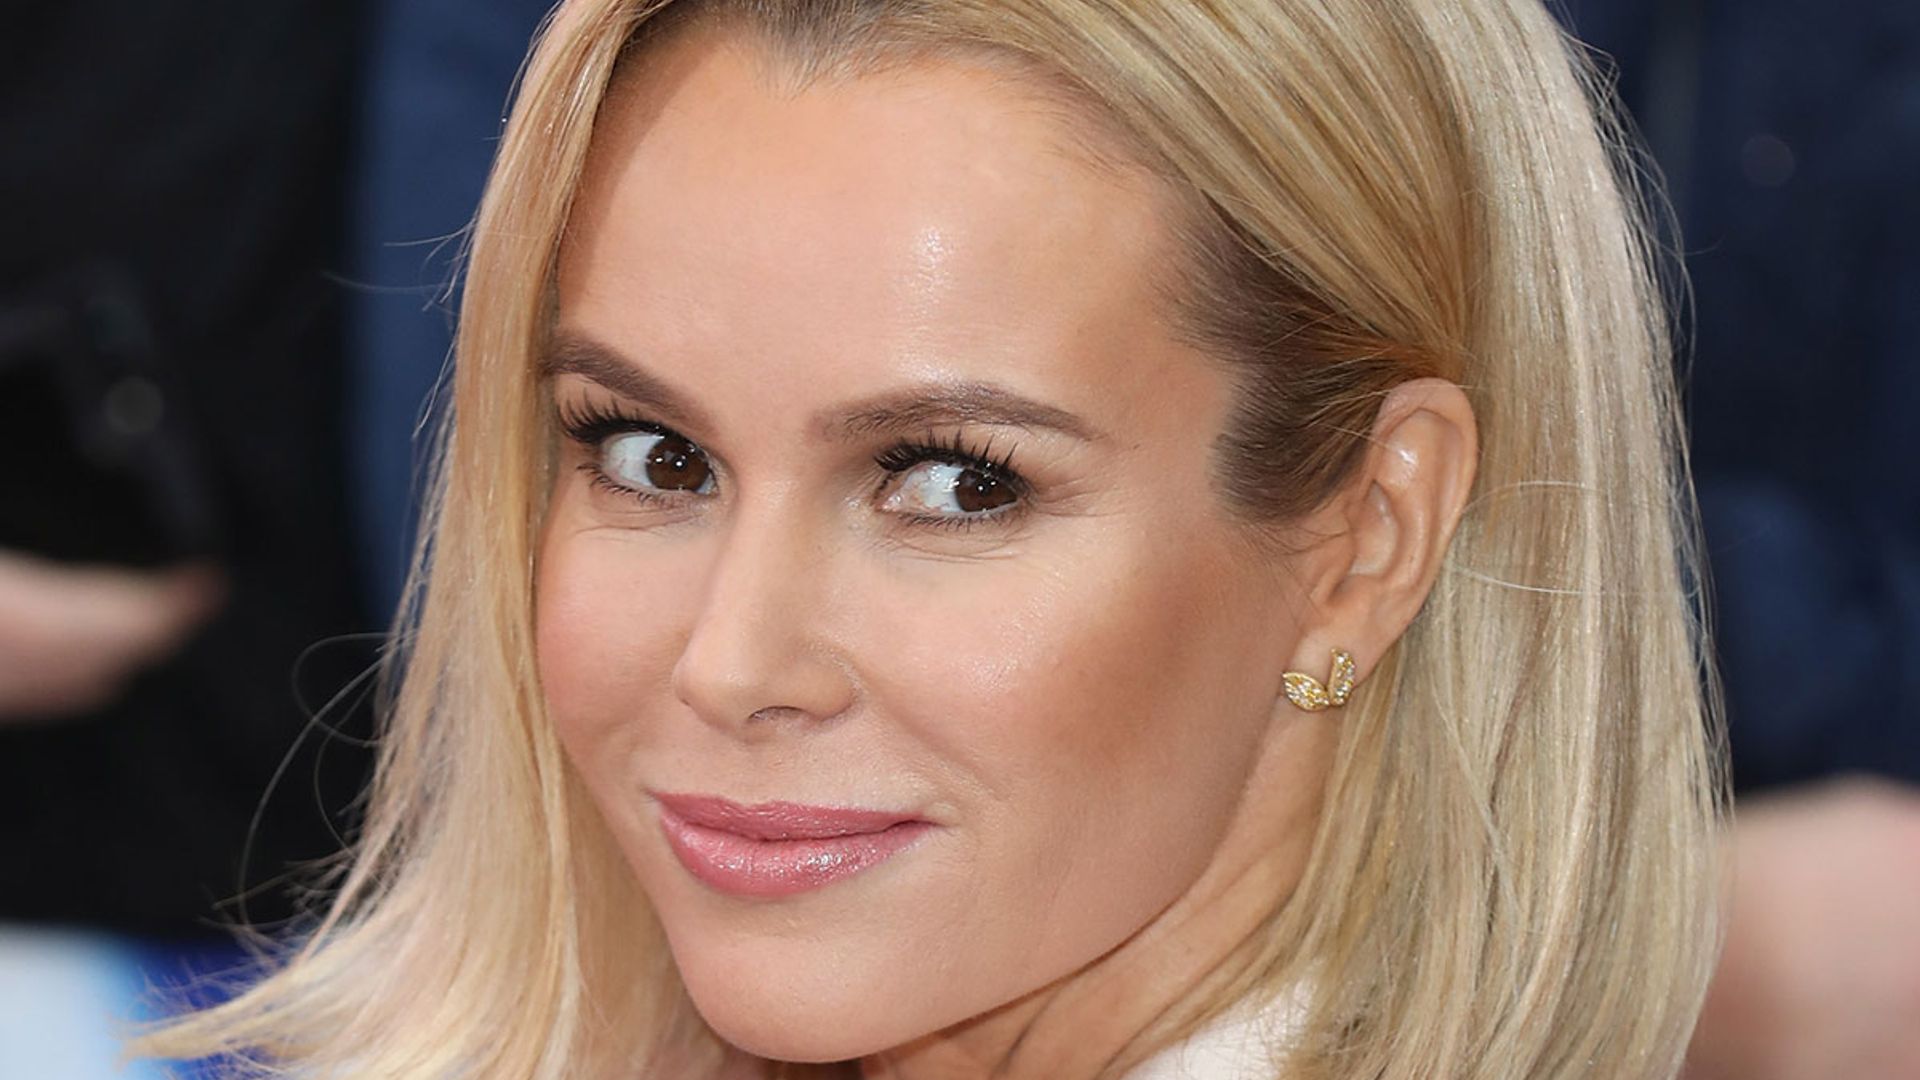 Amanda Holden pays tribute to Captain Sir Tom Moore with poignant outfit choice